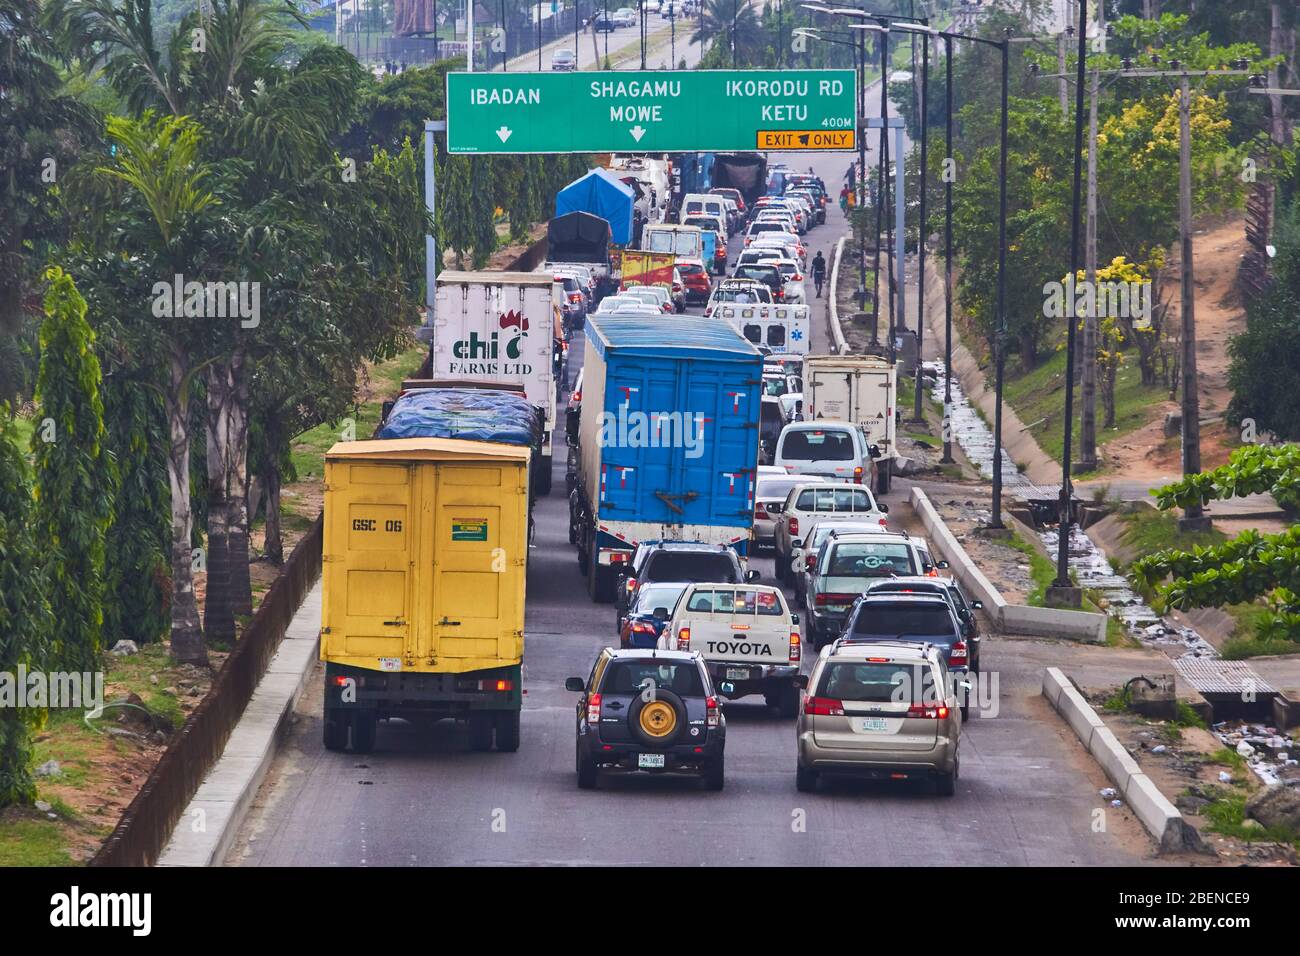 Vehicles stuck in traffic at a road block during Covid-19 Lockdown in Lagos. Stock Photo